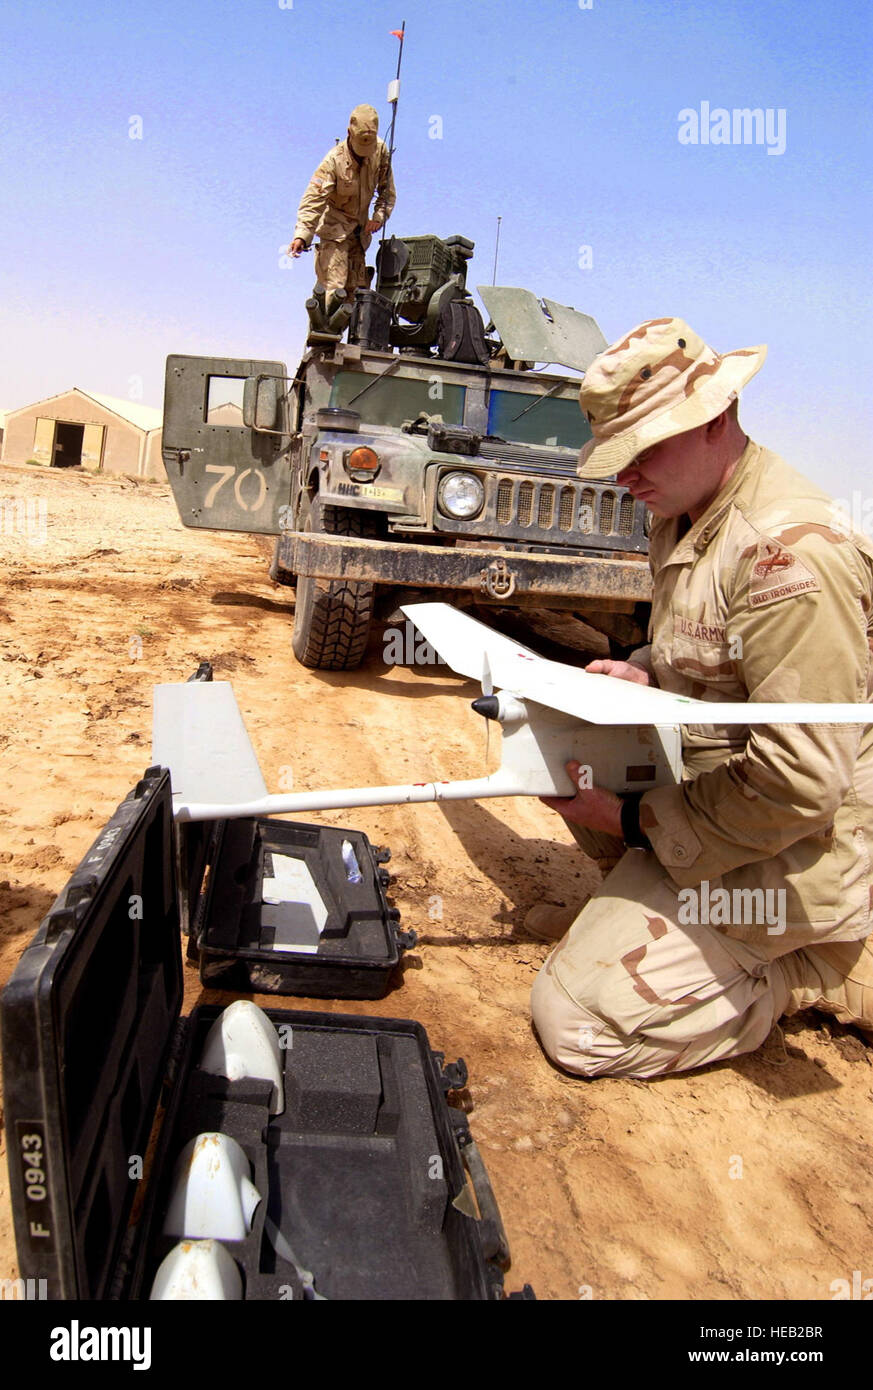 050621-F-9712C-007  Army Cpl. Jerry Rogers assembles a RQ-11 Raven unmanned aerial vehicle in order to conduct aerial tactical reconnaissance of insurgents in Taji, Iraq, on June 21, 2005.  The Raven has video cameras located in the nose cone and can relay live video back to the operator in real-time.  Rogers is attached to the Scout Platoon, 1st Battalion, 13th Armor Regiment, 3rd Brigade, 1st Armored Division.   Tech. Sgt. Russell E. Cooley IV, U.S. Air Force.  (Released) Stock Photo